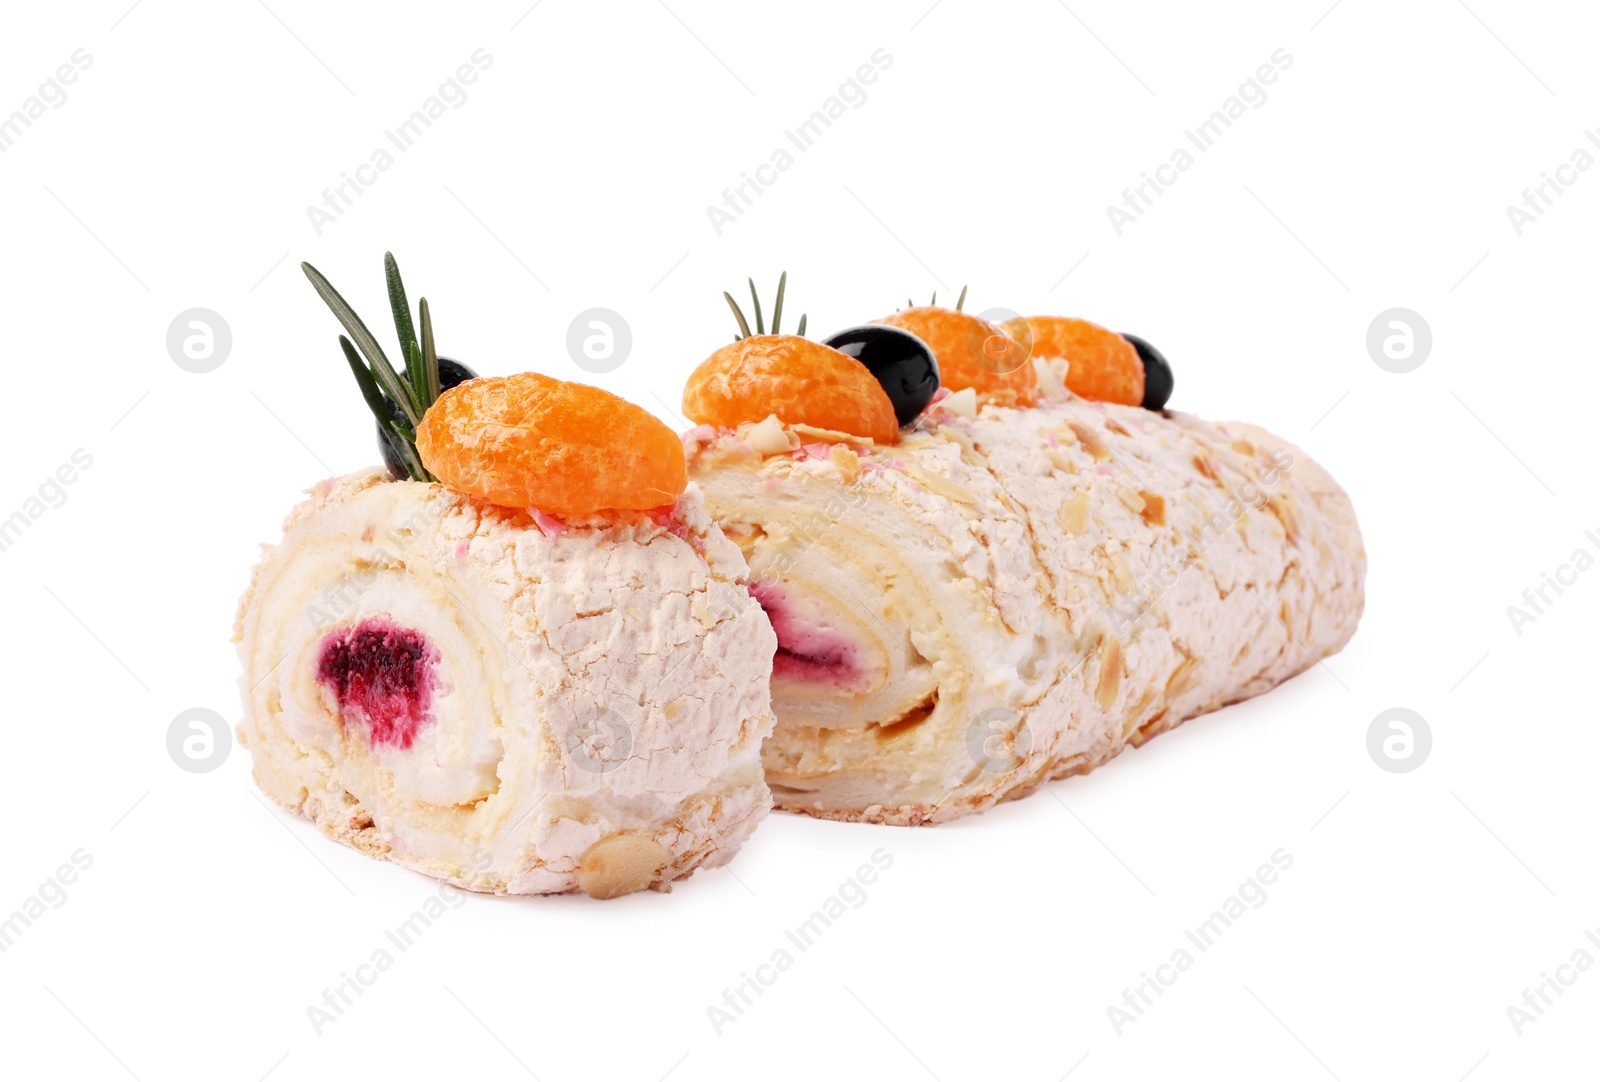 Photo of Tasty meringue roll with jam, tangerine slices and rosemary isolated on white